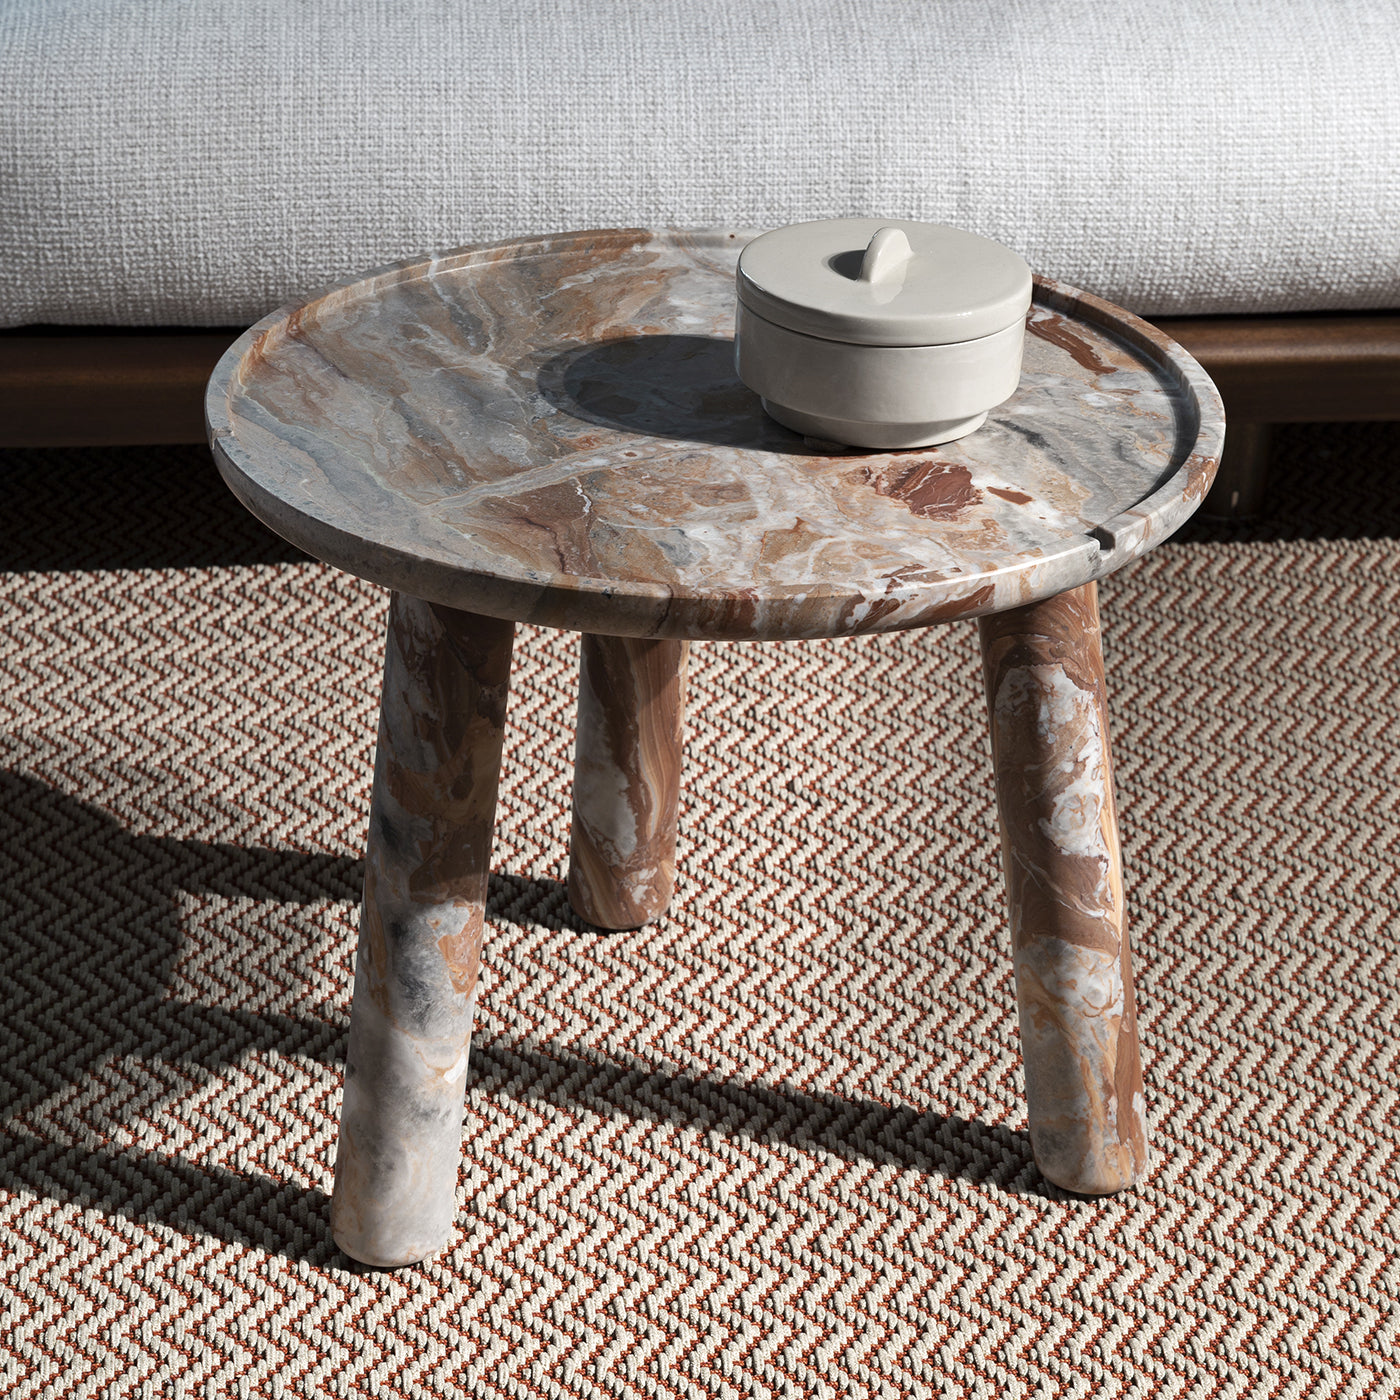 Stone Round Coffee Table 50 by Ludovica and Roberto Palomba - Alternative view 2